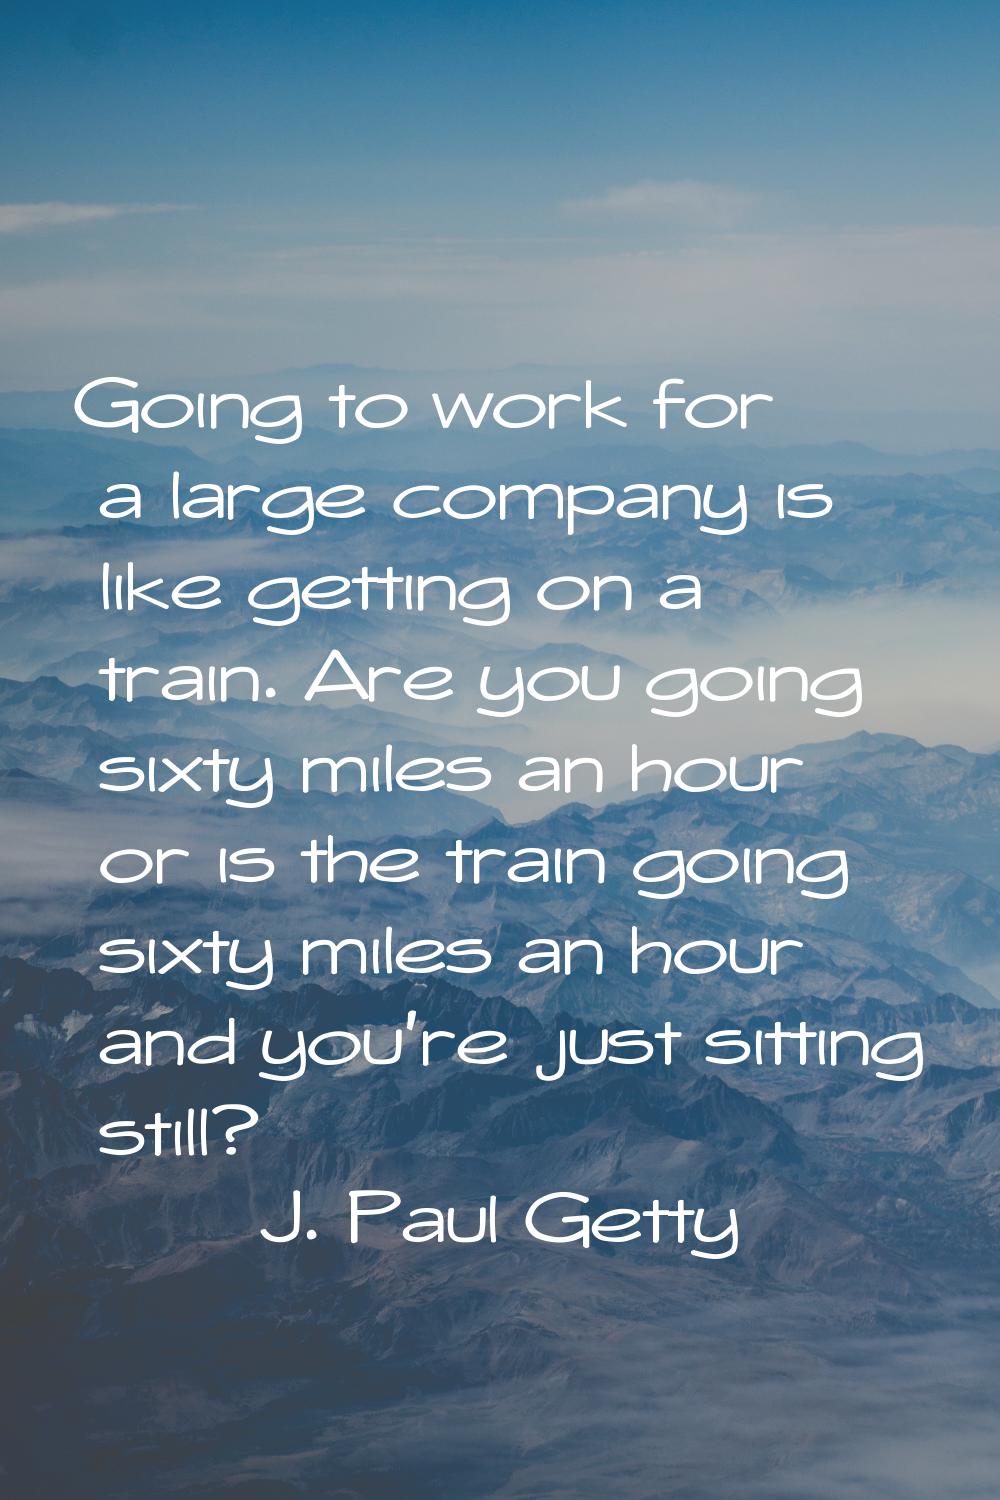 Going to work for a large company is like getting on a train. Are you going sixty miles an hour or 